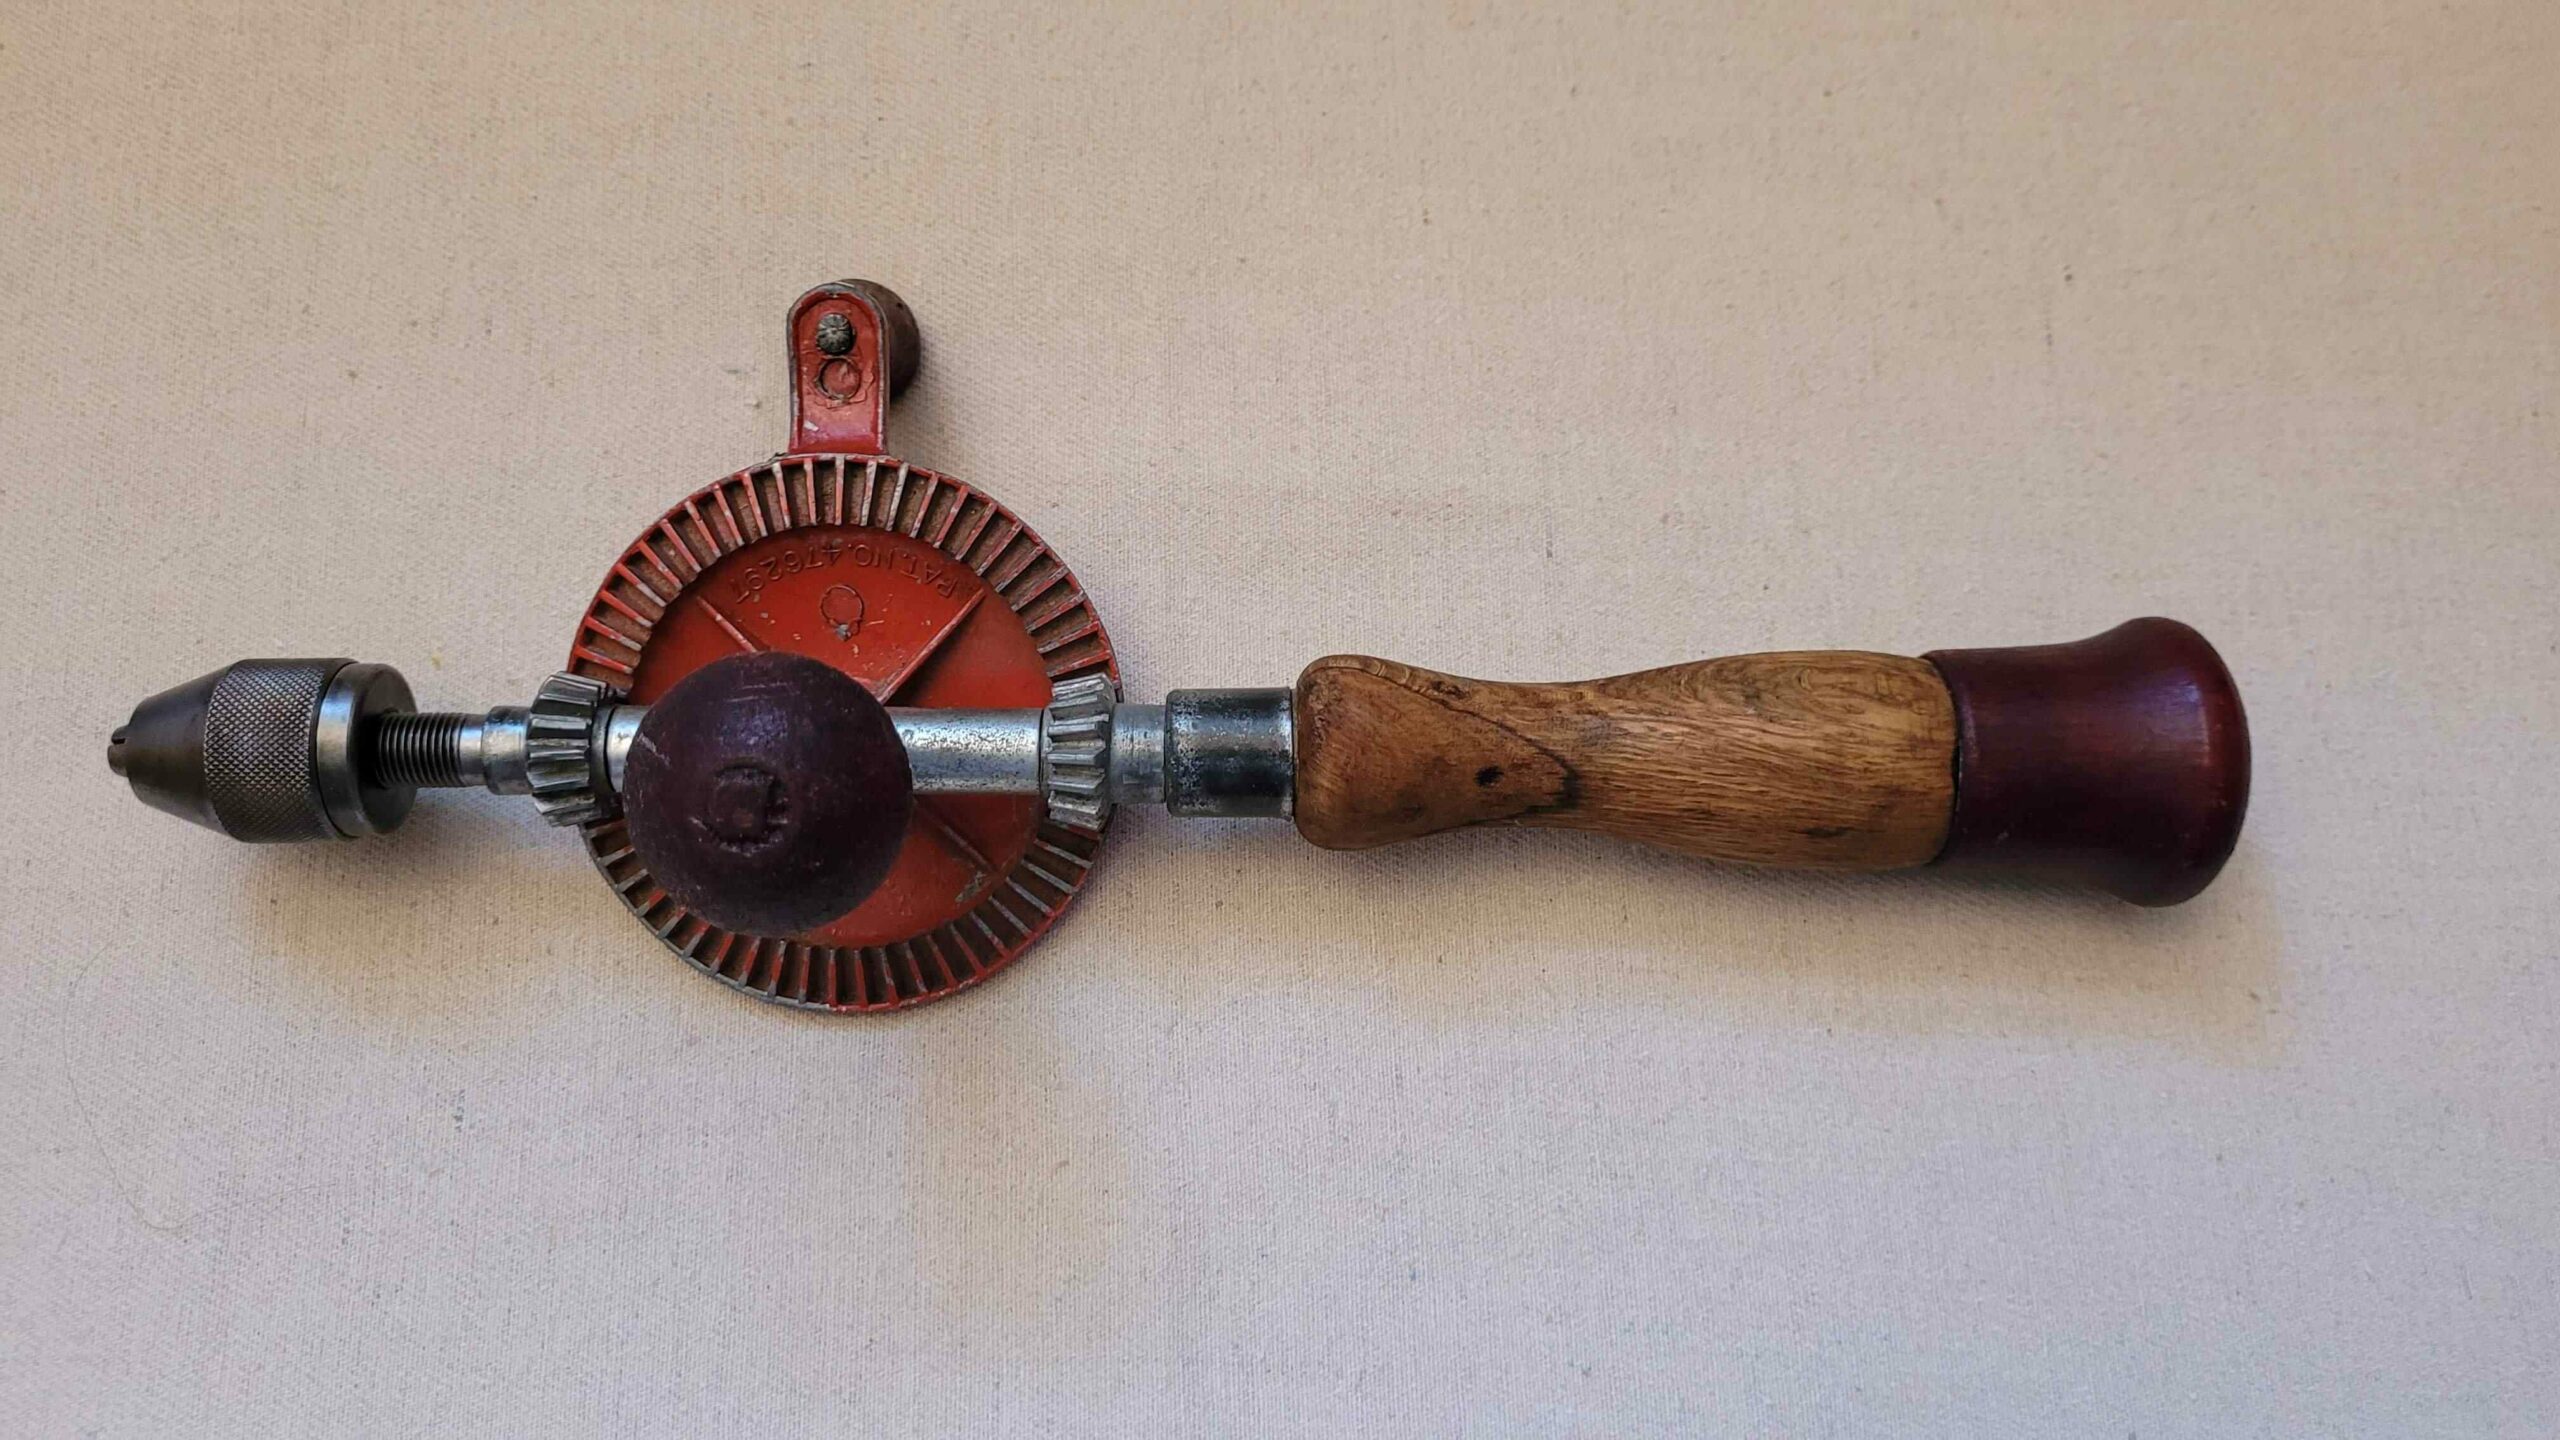 Vintage 1950s Hand Crank Drill Egg Beater Style Wood handle Pat No 476297 made in Japan